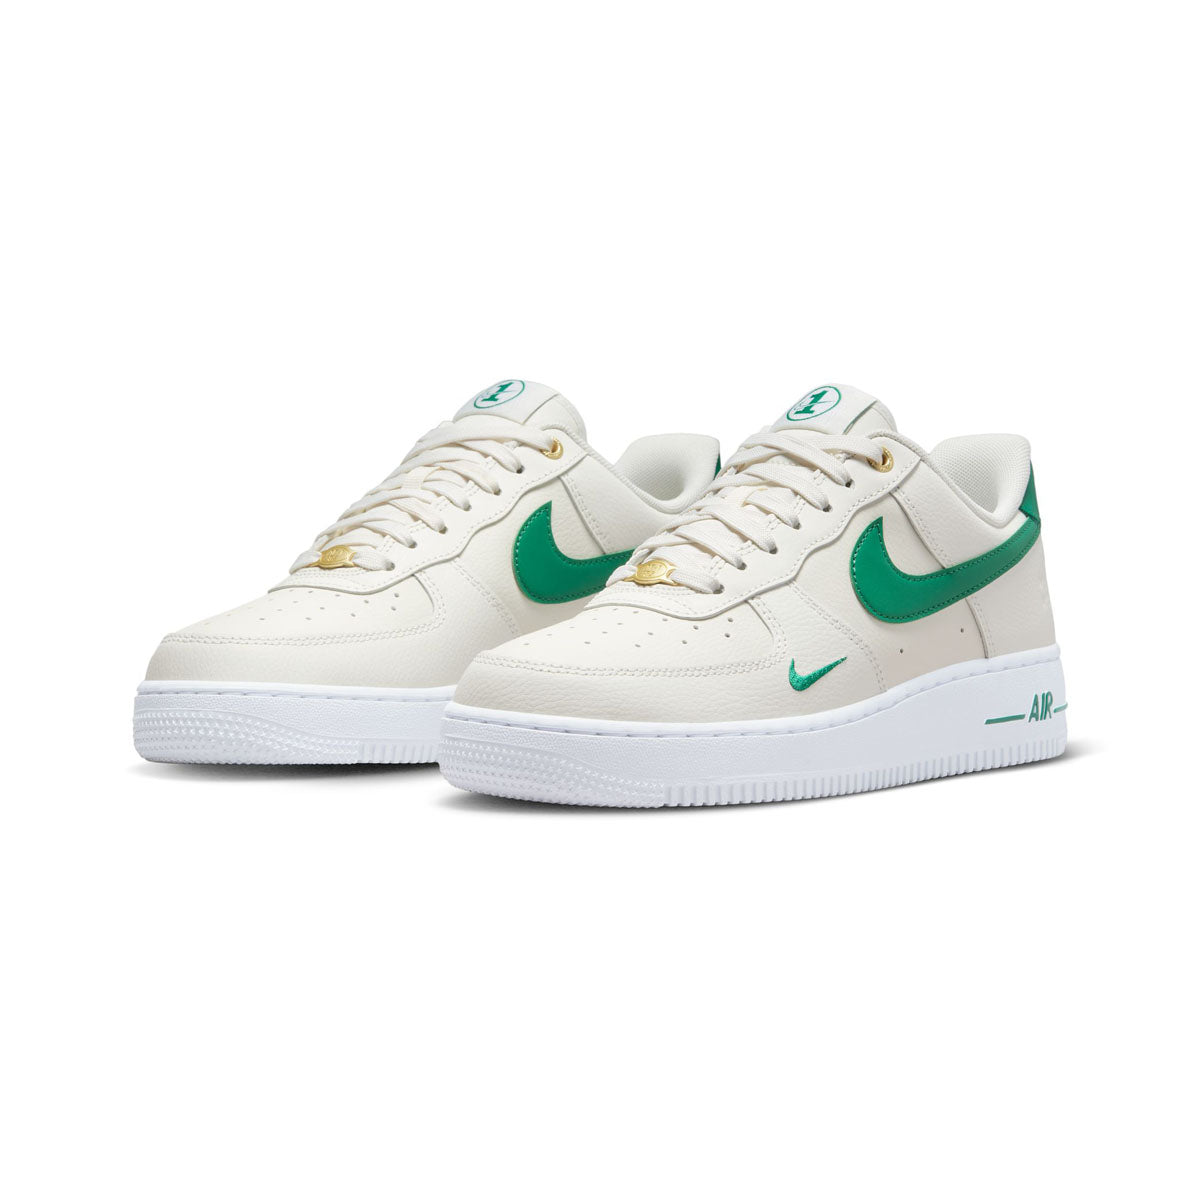 Sneakers Of The Day: Nike Women's Air Force 1 “City Collection